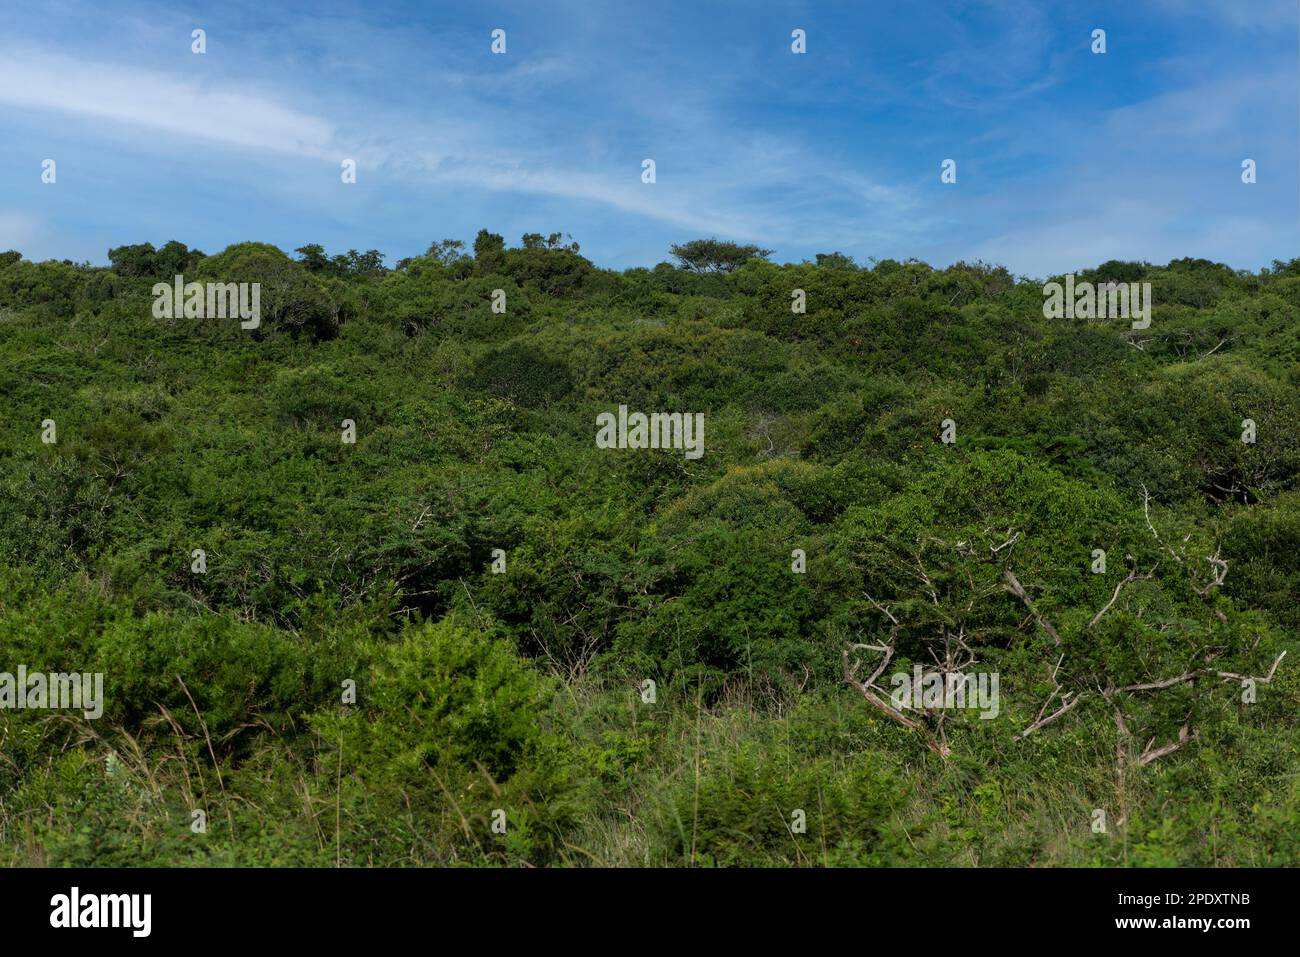 Habitat that has become quite dense due to less impact from elephants Stock Photo